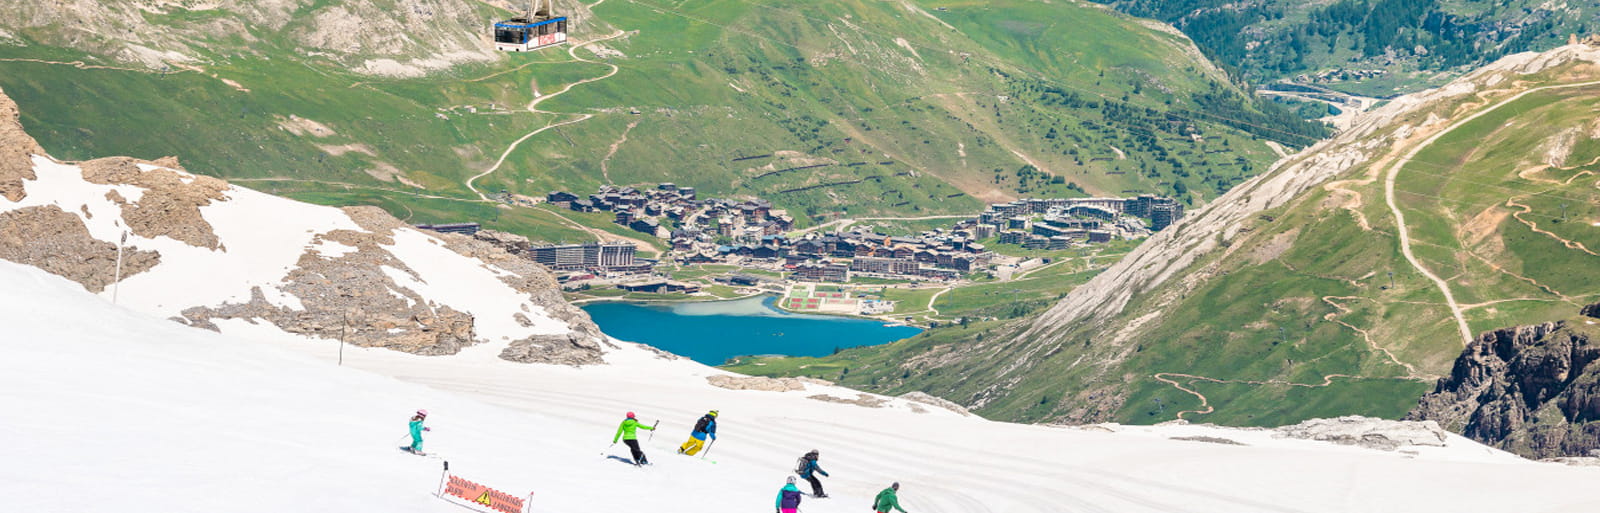 This summer it is possible to ski at an altitude of 3000m under the sun of Tignes.